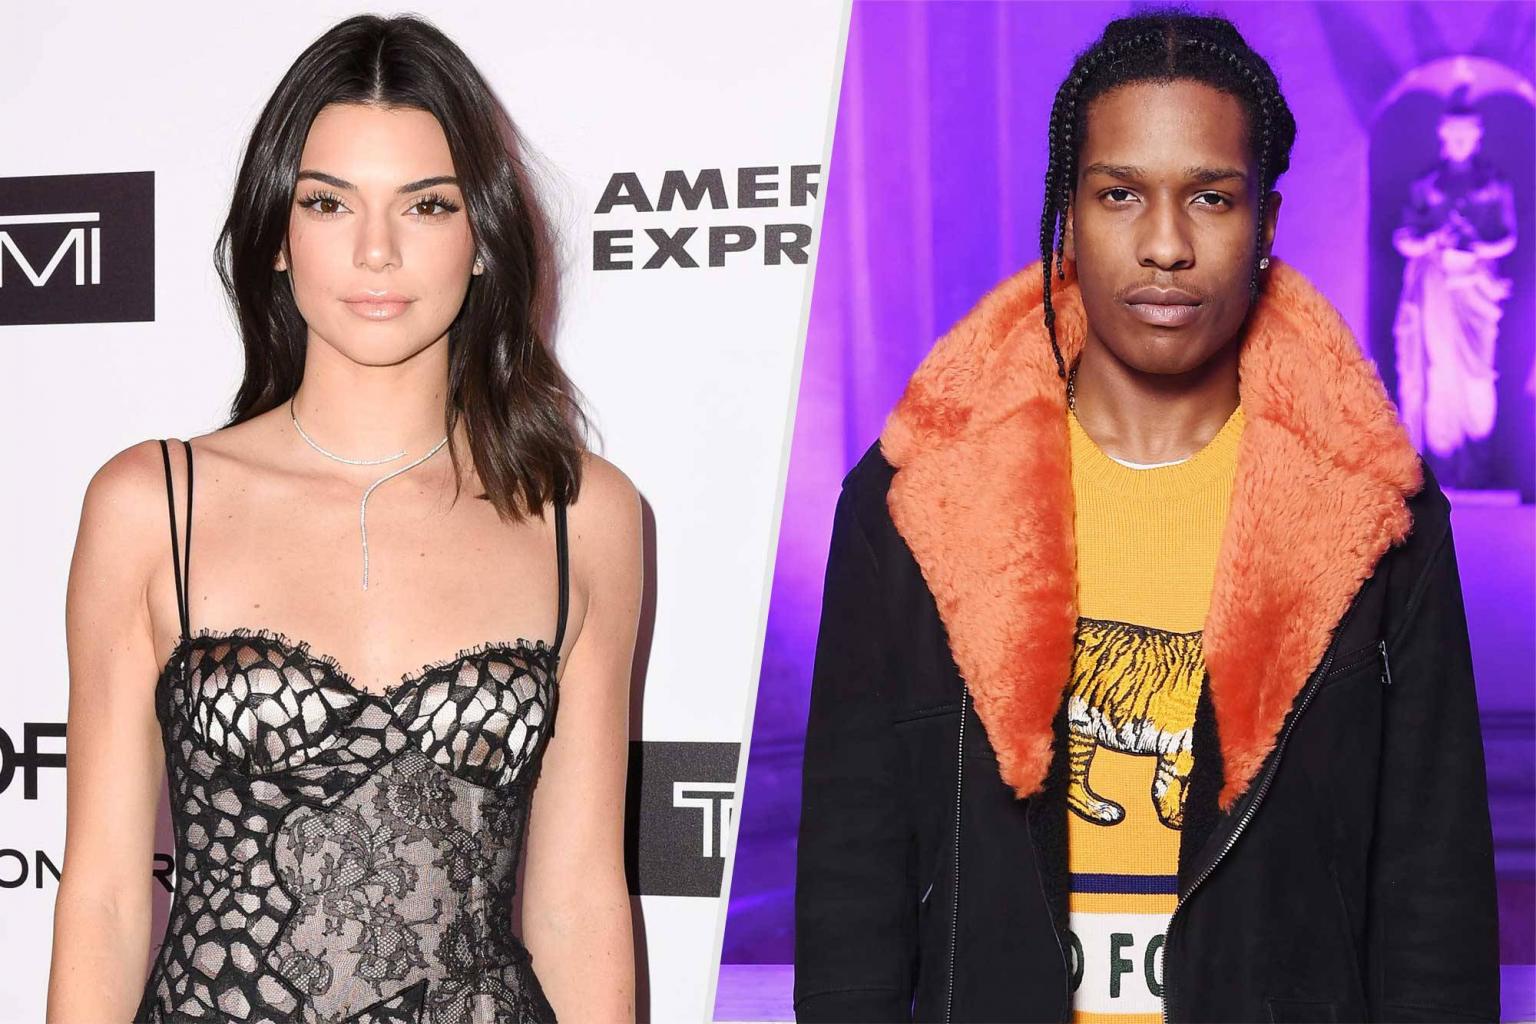 Kendall Jenner and A$AP Rocky Were        All Over Each Other      '  at Coachella Party: Source